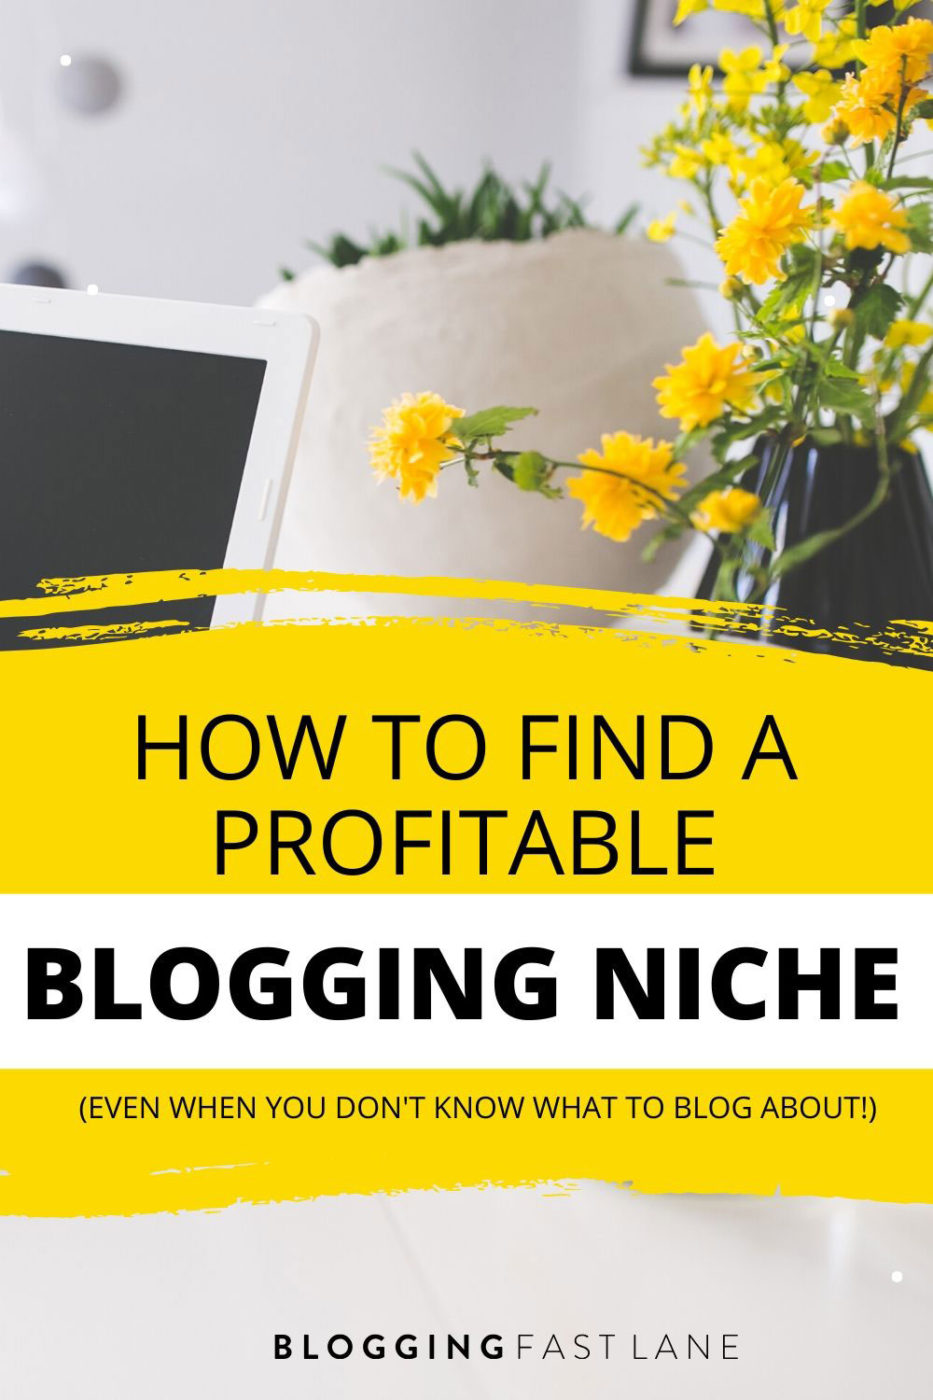 How to find a profitable blogging niche this 2020